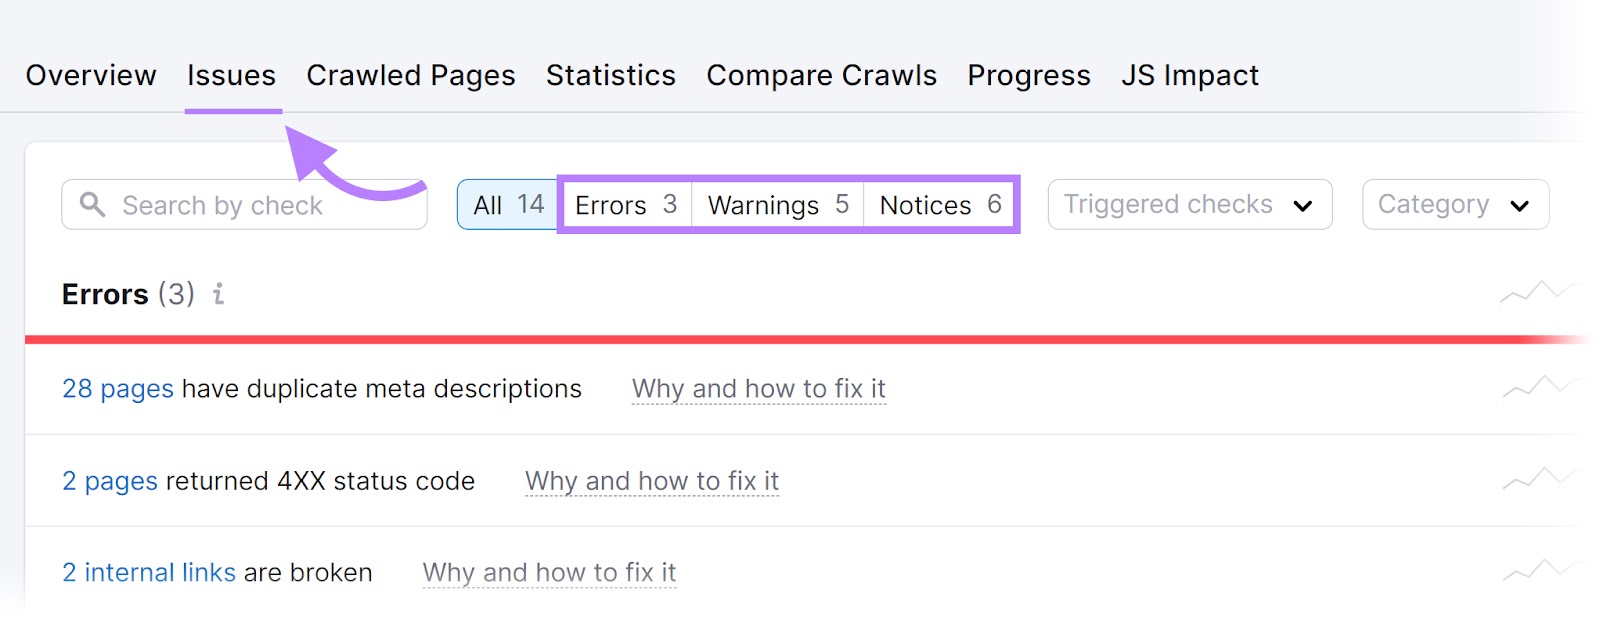 "Issues" tab of the Site Audit tool with the "Errors", "Warnings", and "Notices" filters highlighted.